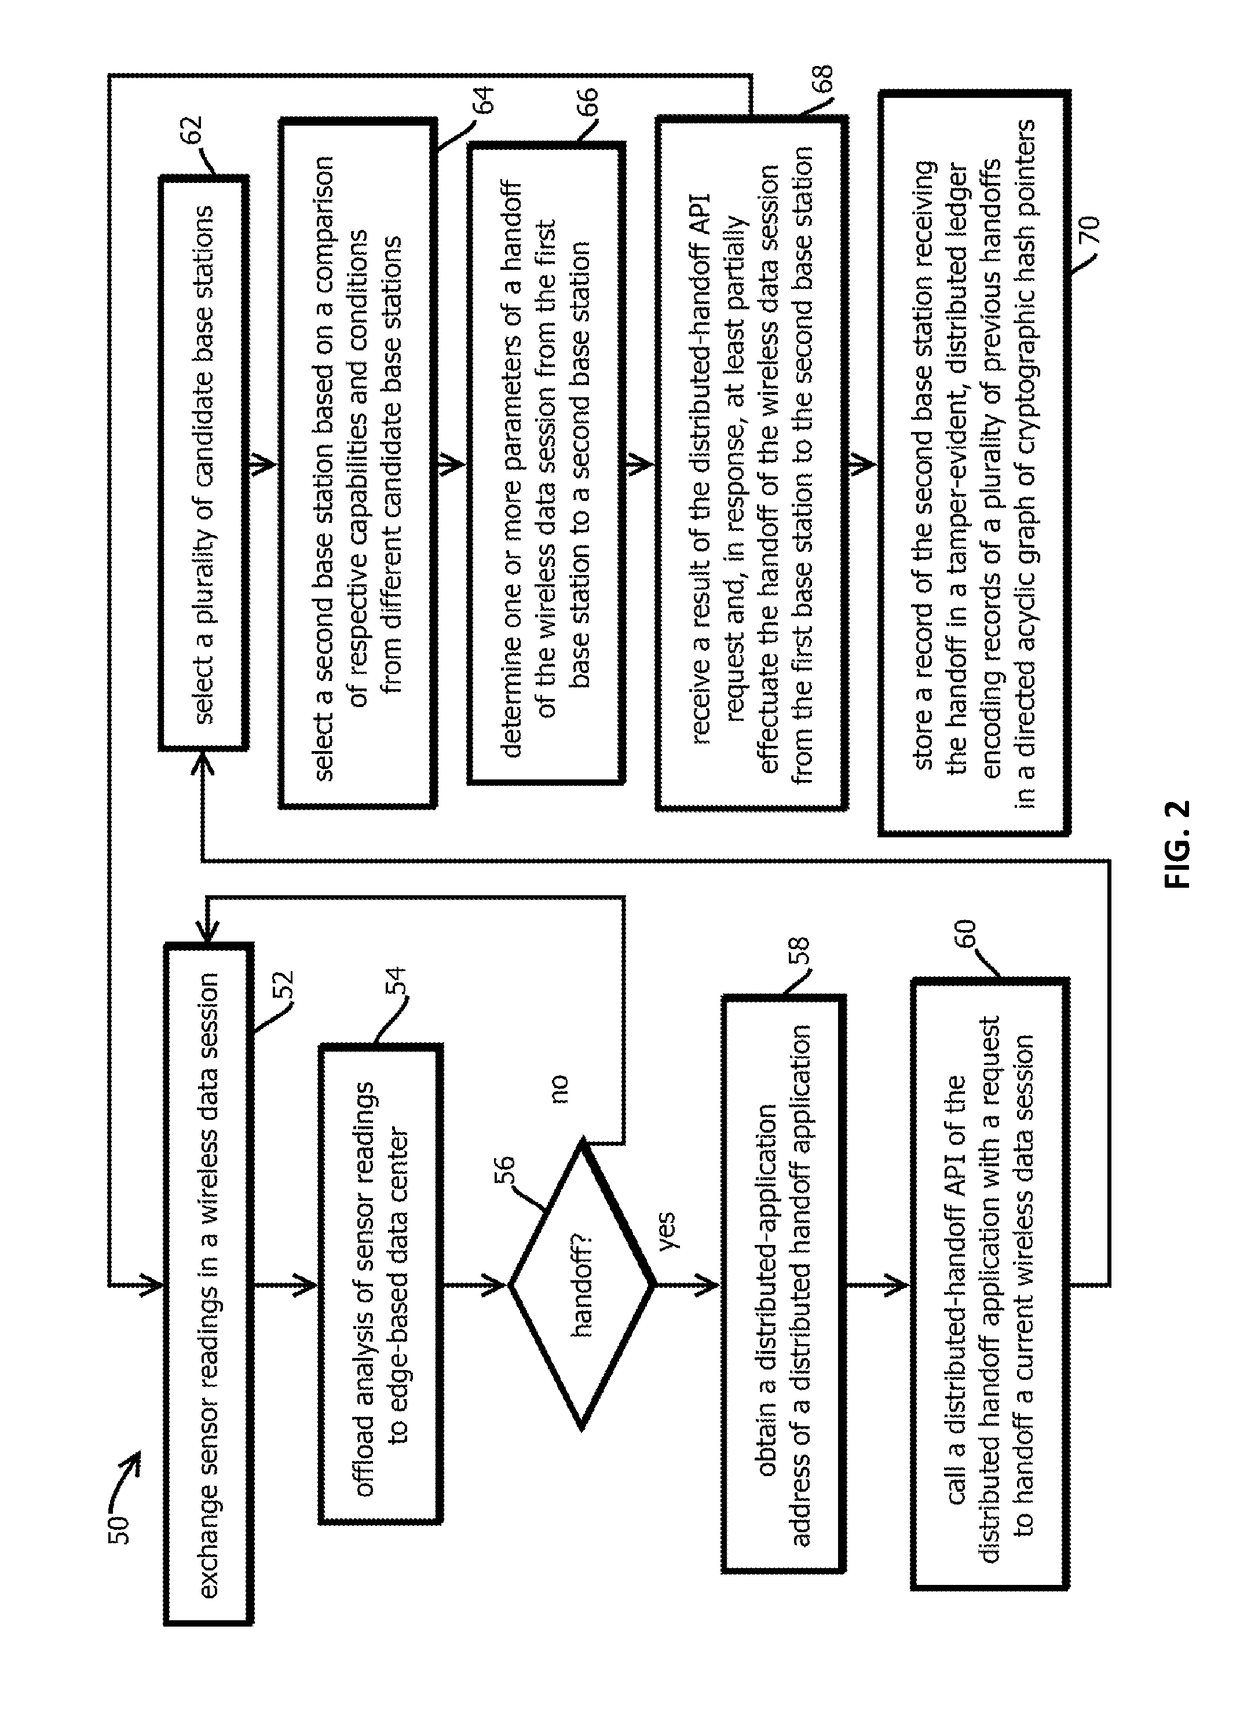 Distributed handoff-related processing for wireless networks